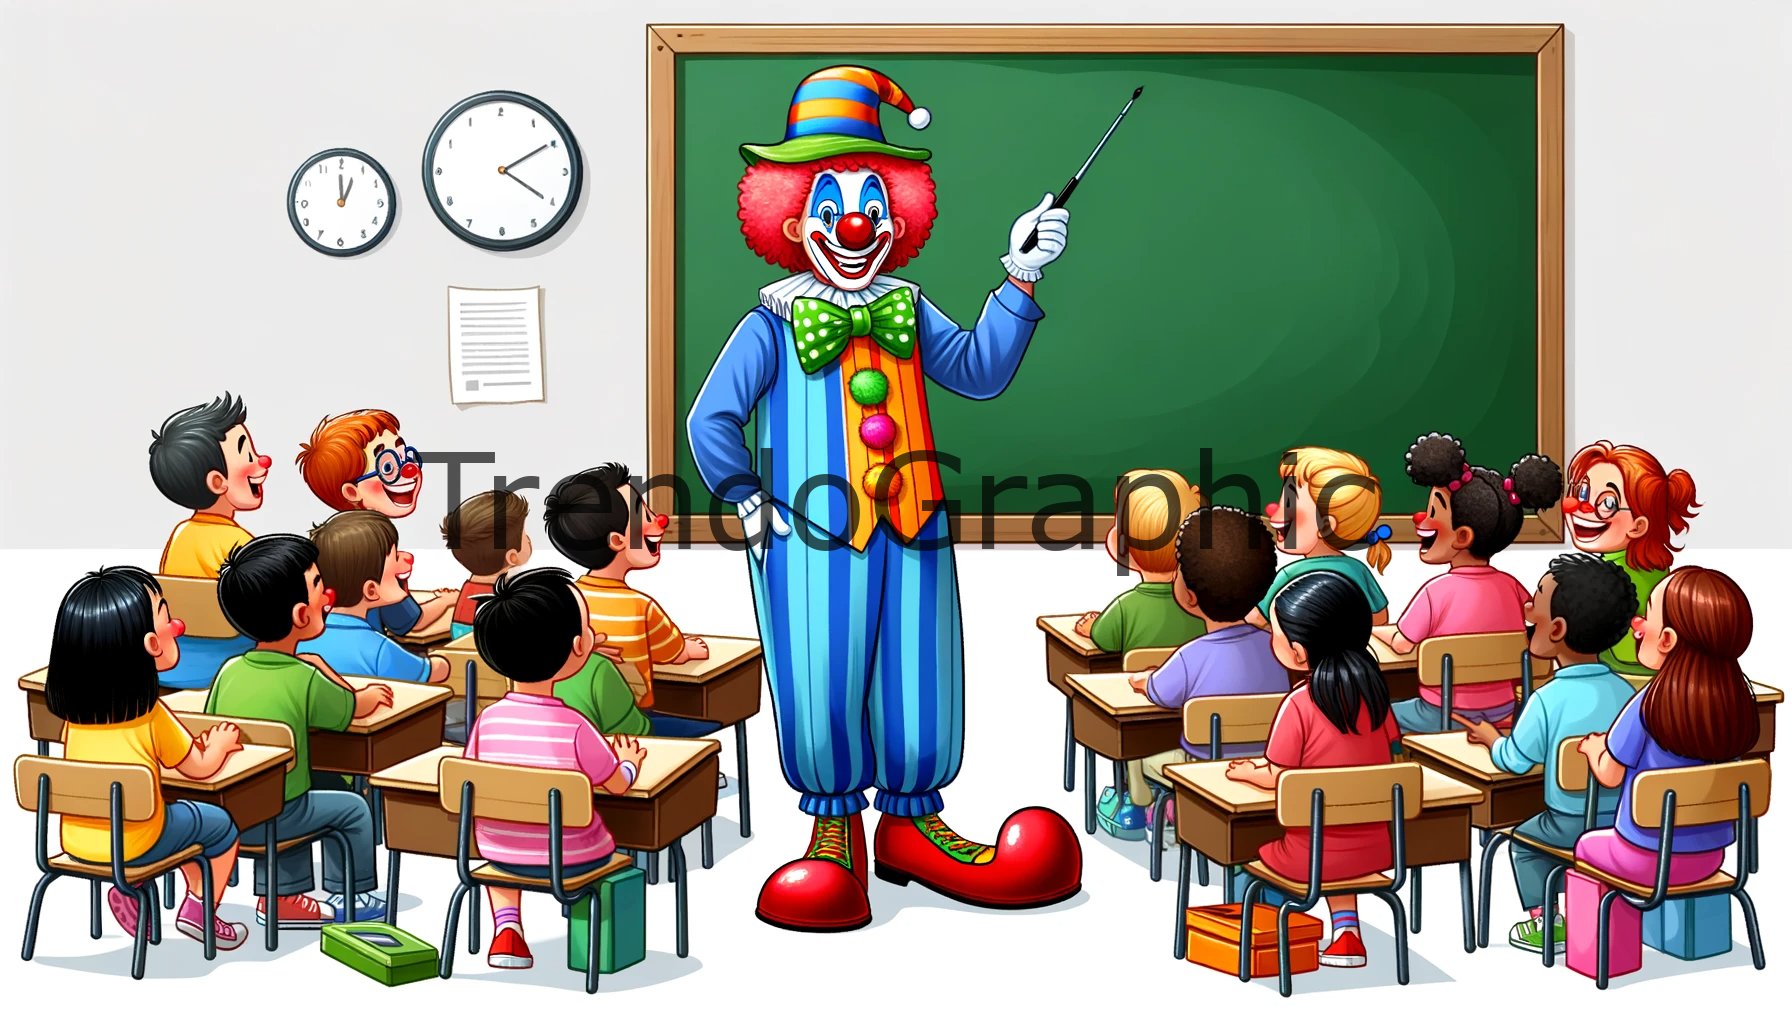 Engaging Classroom Humor: A Clown’s Interactive Lesson